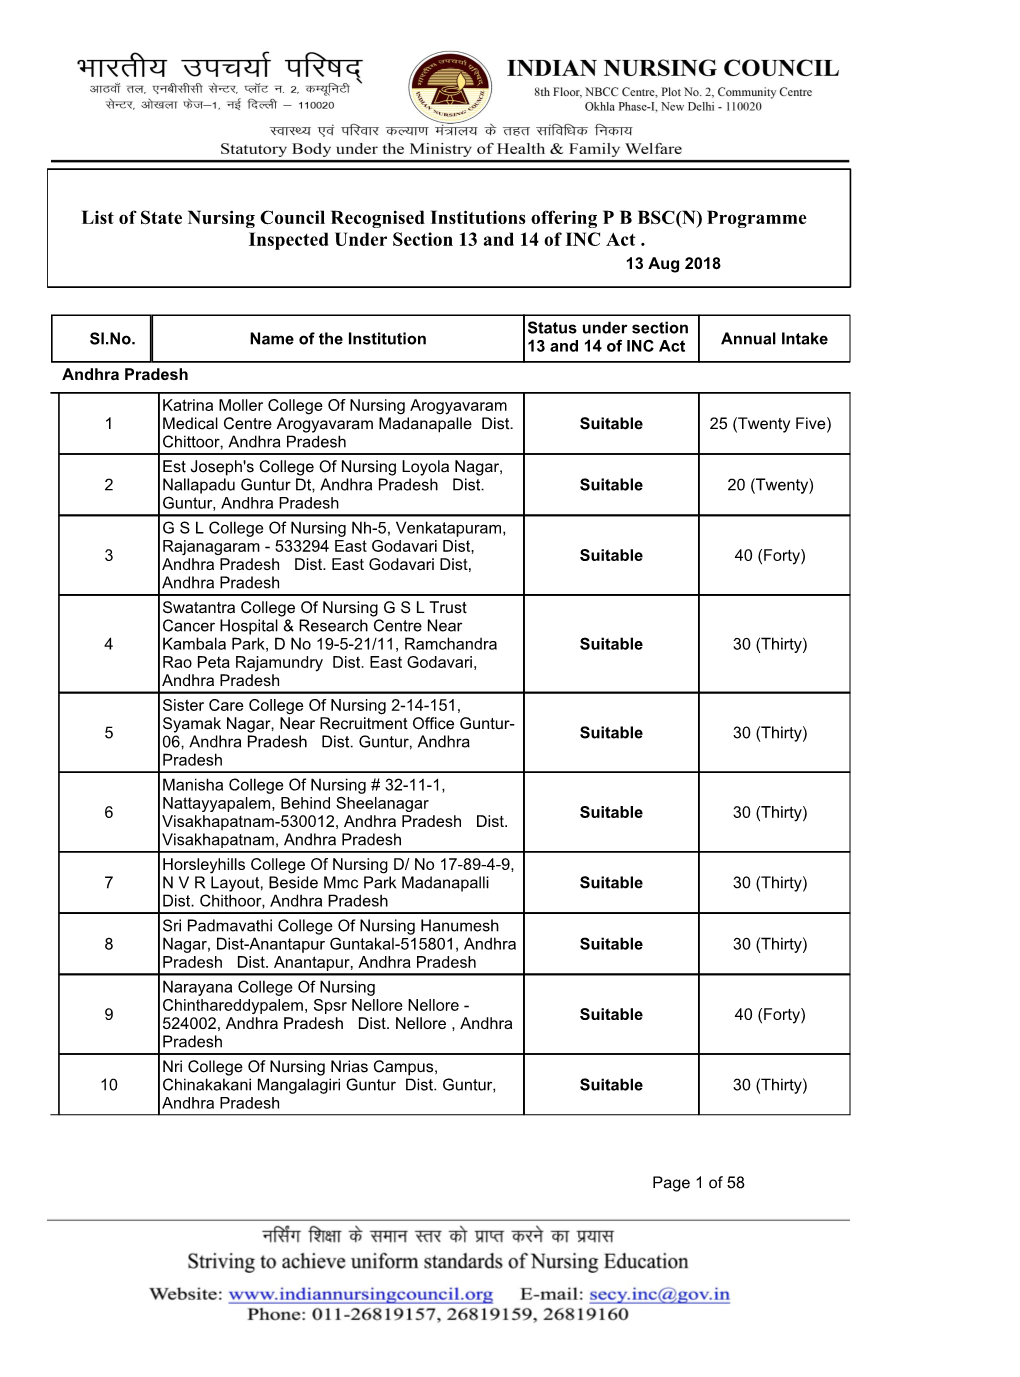 List of State Nursing Council Recognised Institutions Offering P B BSC(N) Programme Inspected Under Section 13 and 14 of INC Act